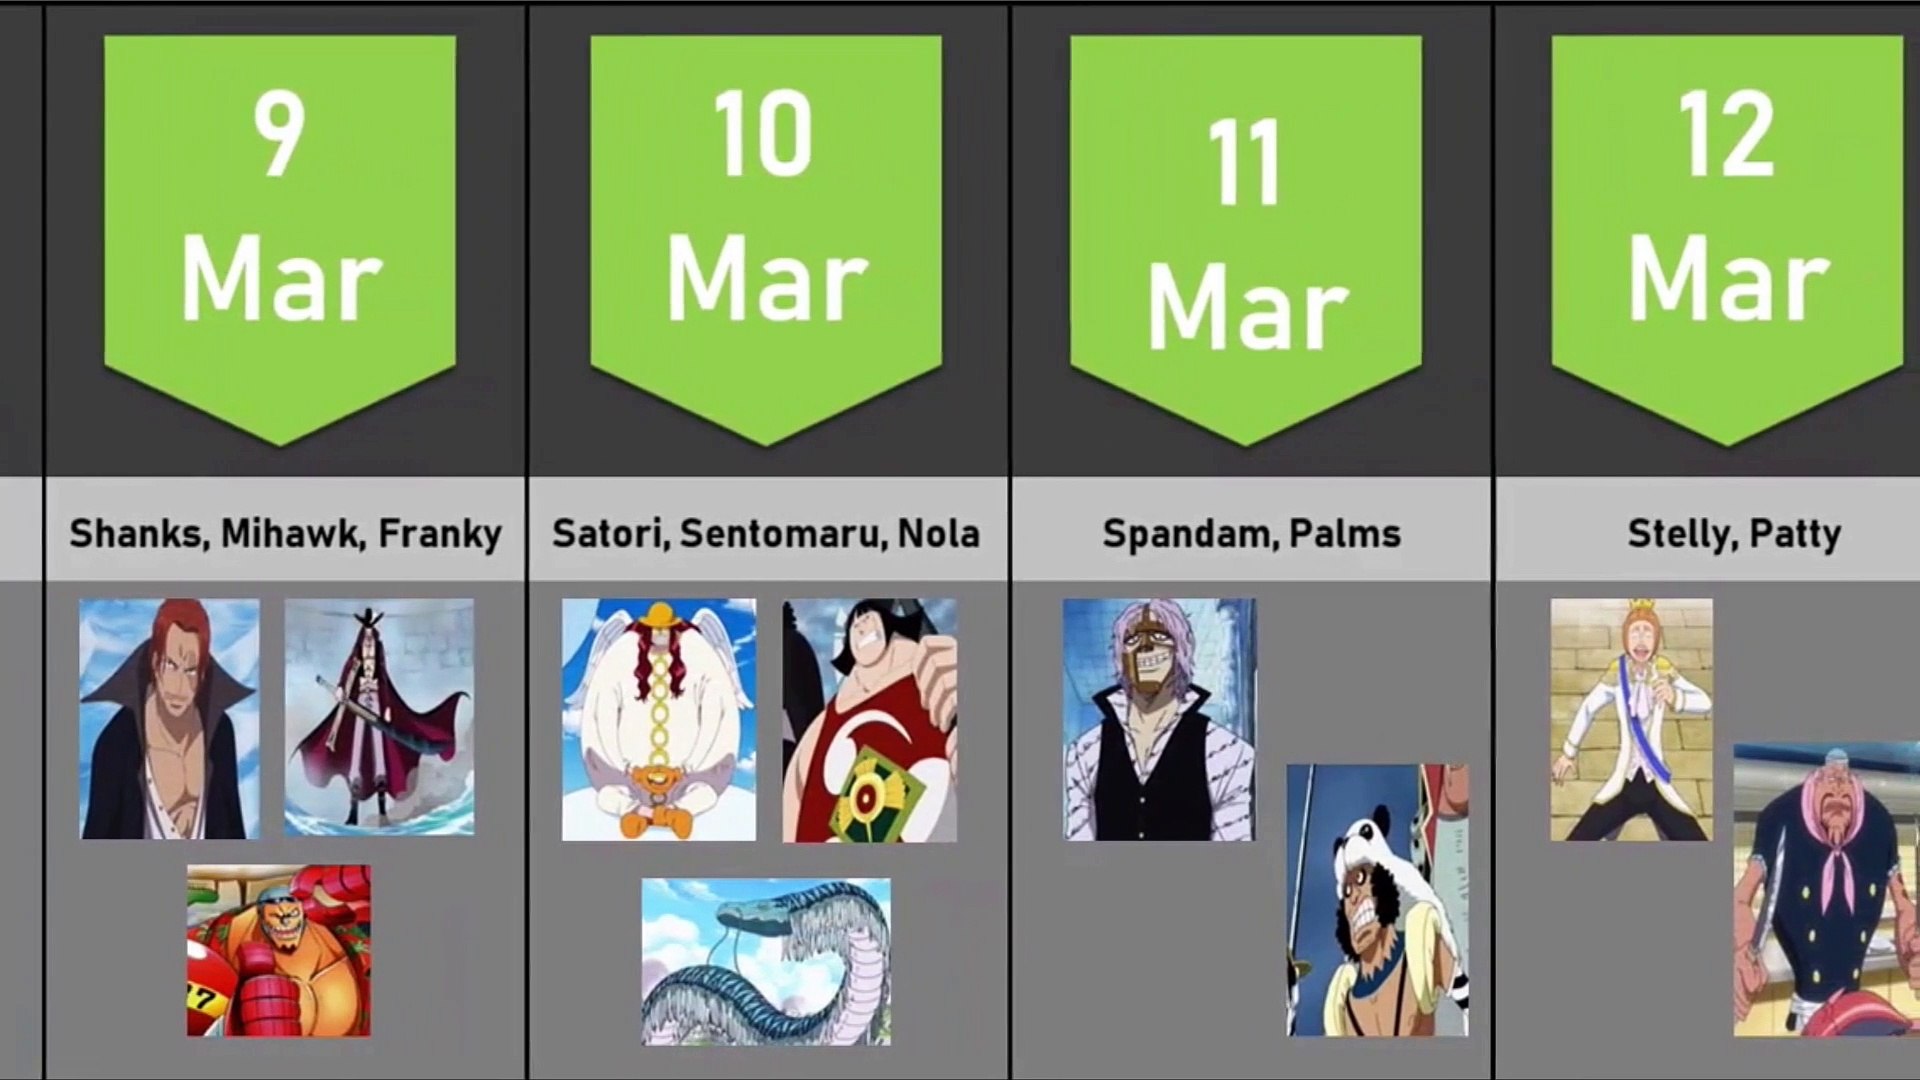 One Piece  When are the birthdays of all its characters? - Meristation